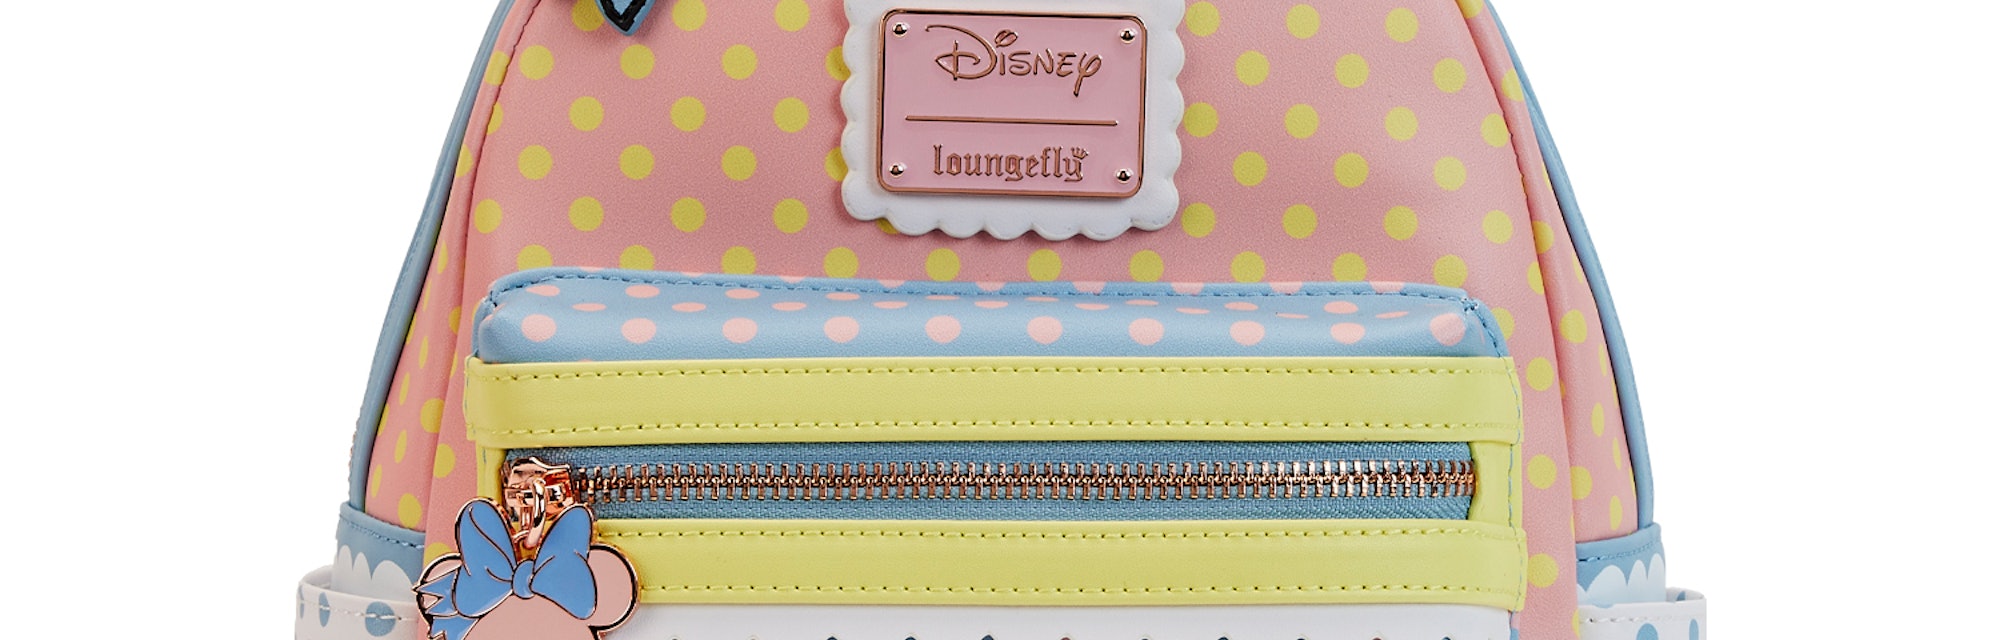 The Loungefly x '90s Disney collab features great bags and accessories themed like Minnie and Daisy.